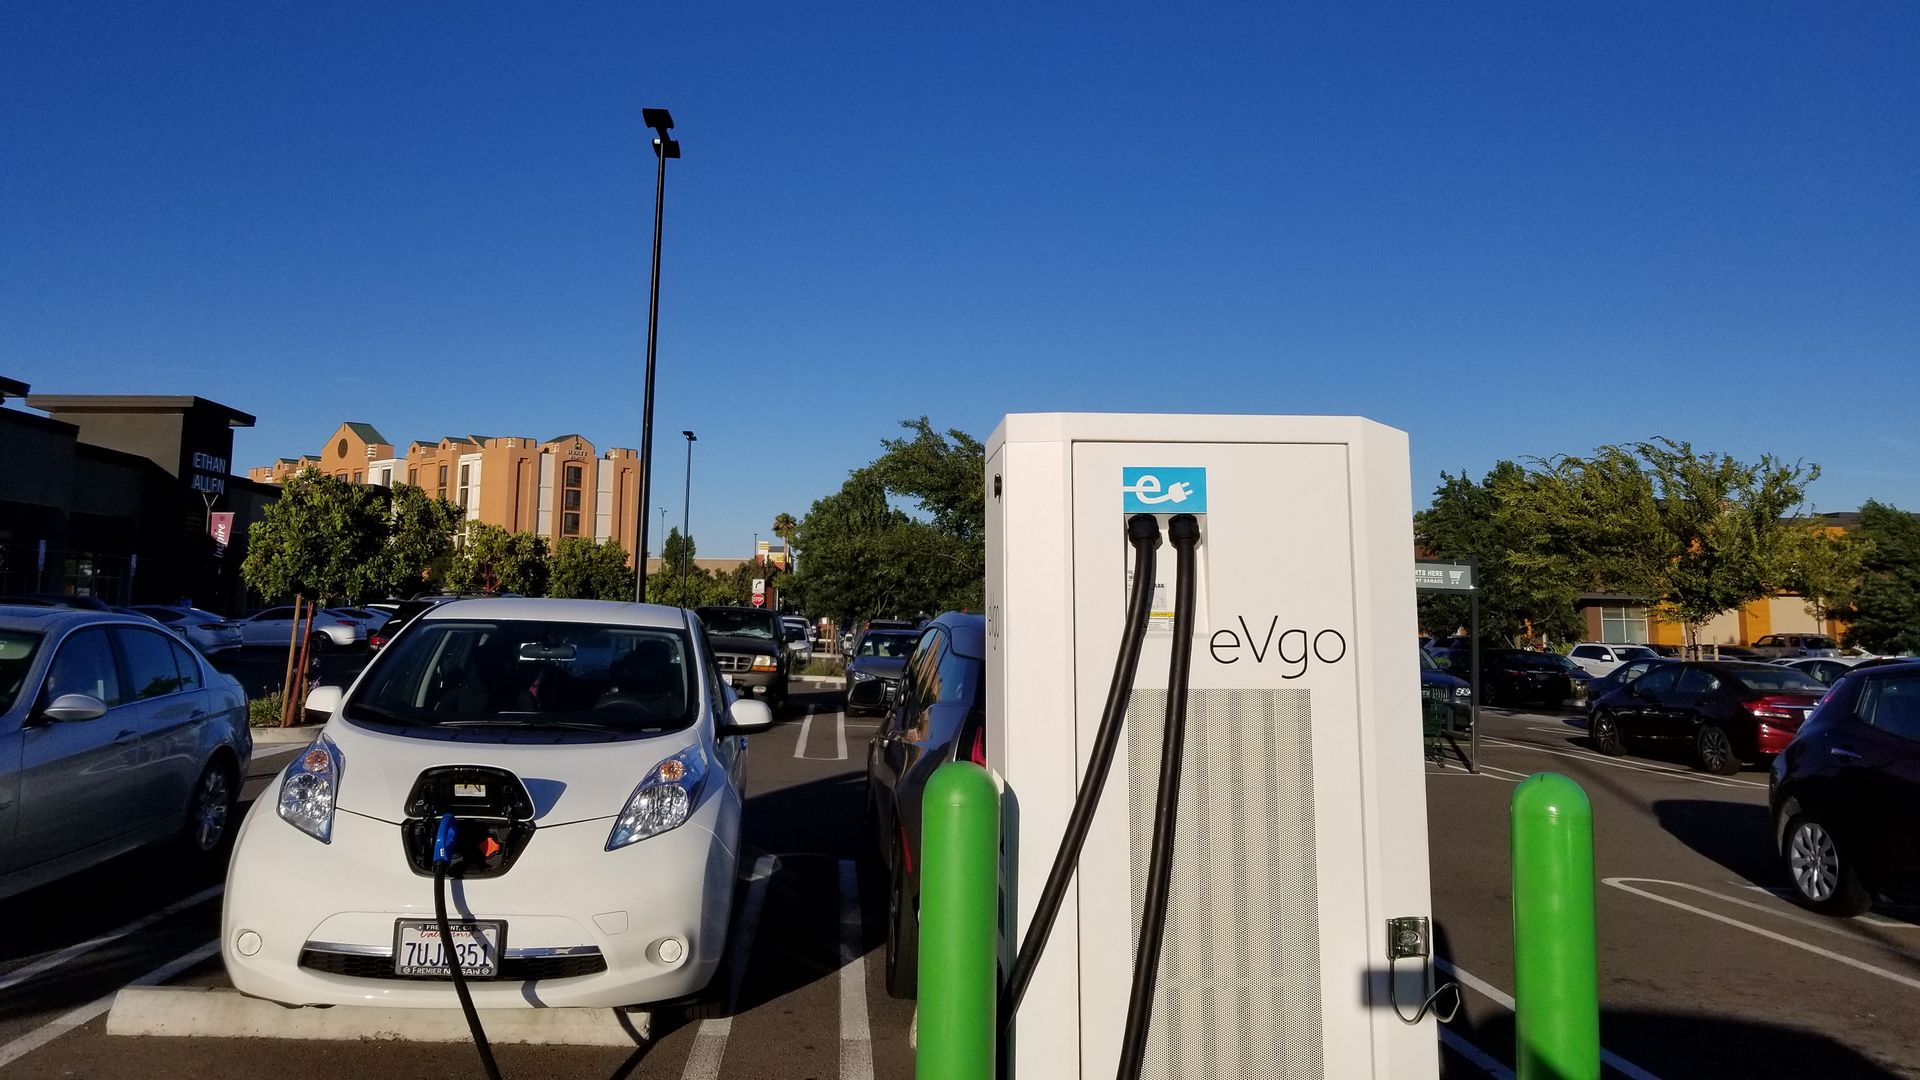 In this image, an electric car is plugged into a charger in a sunny parking lot